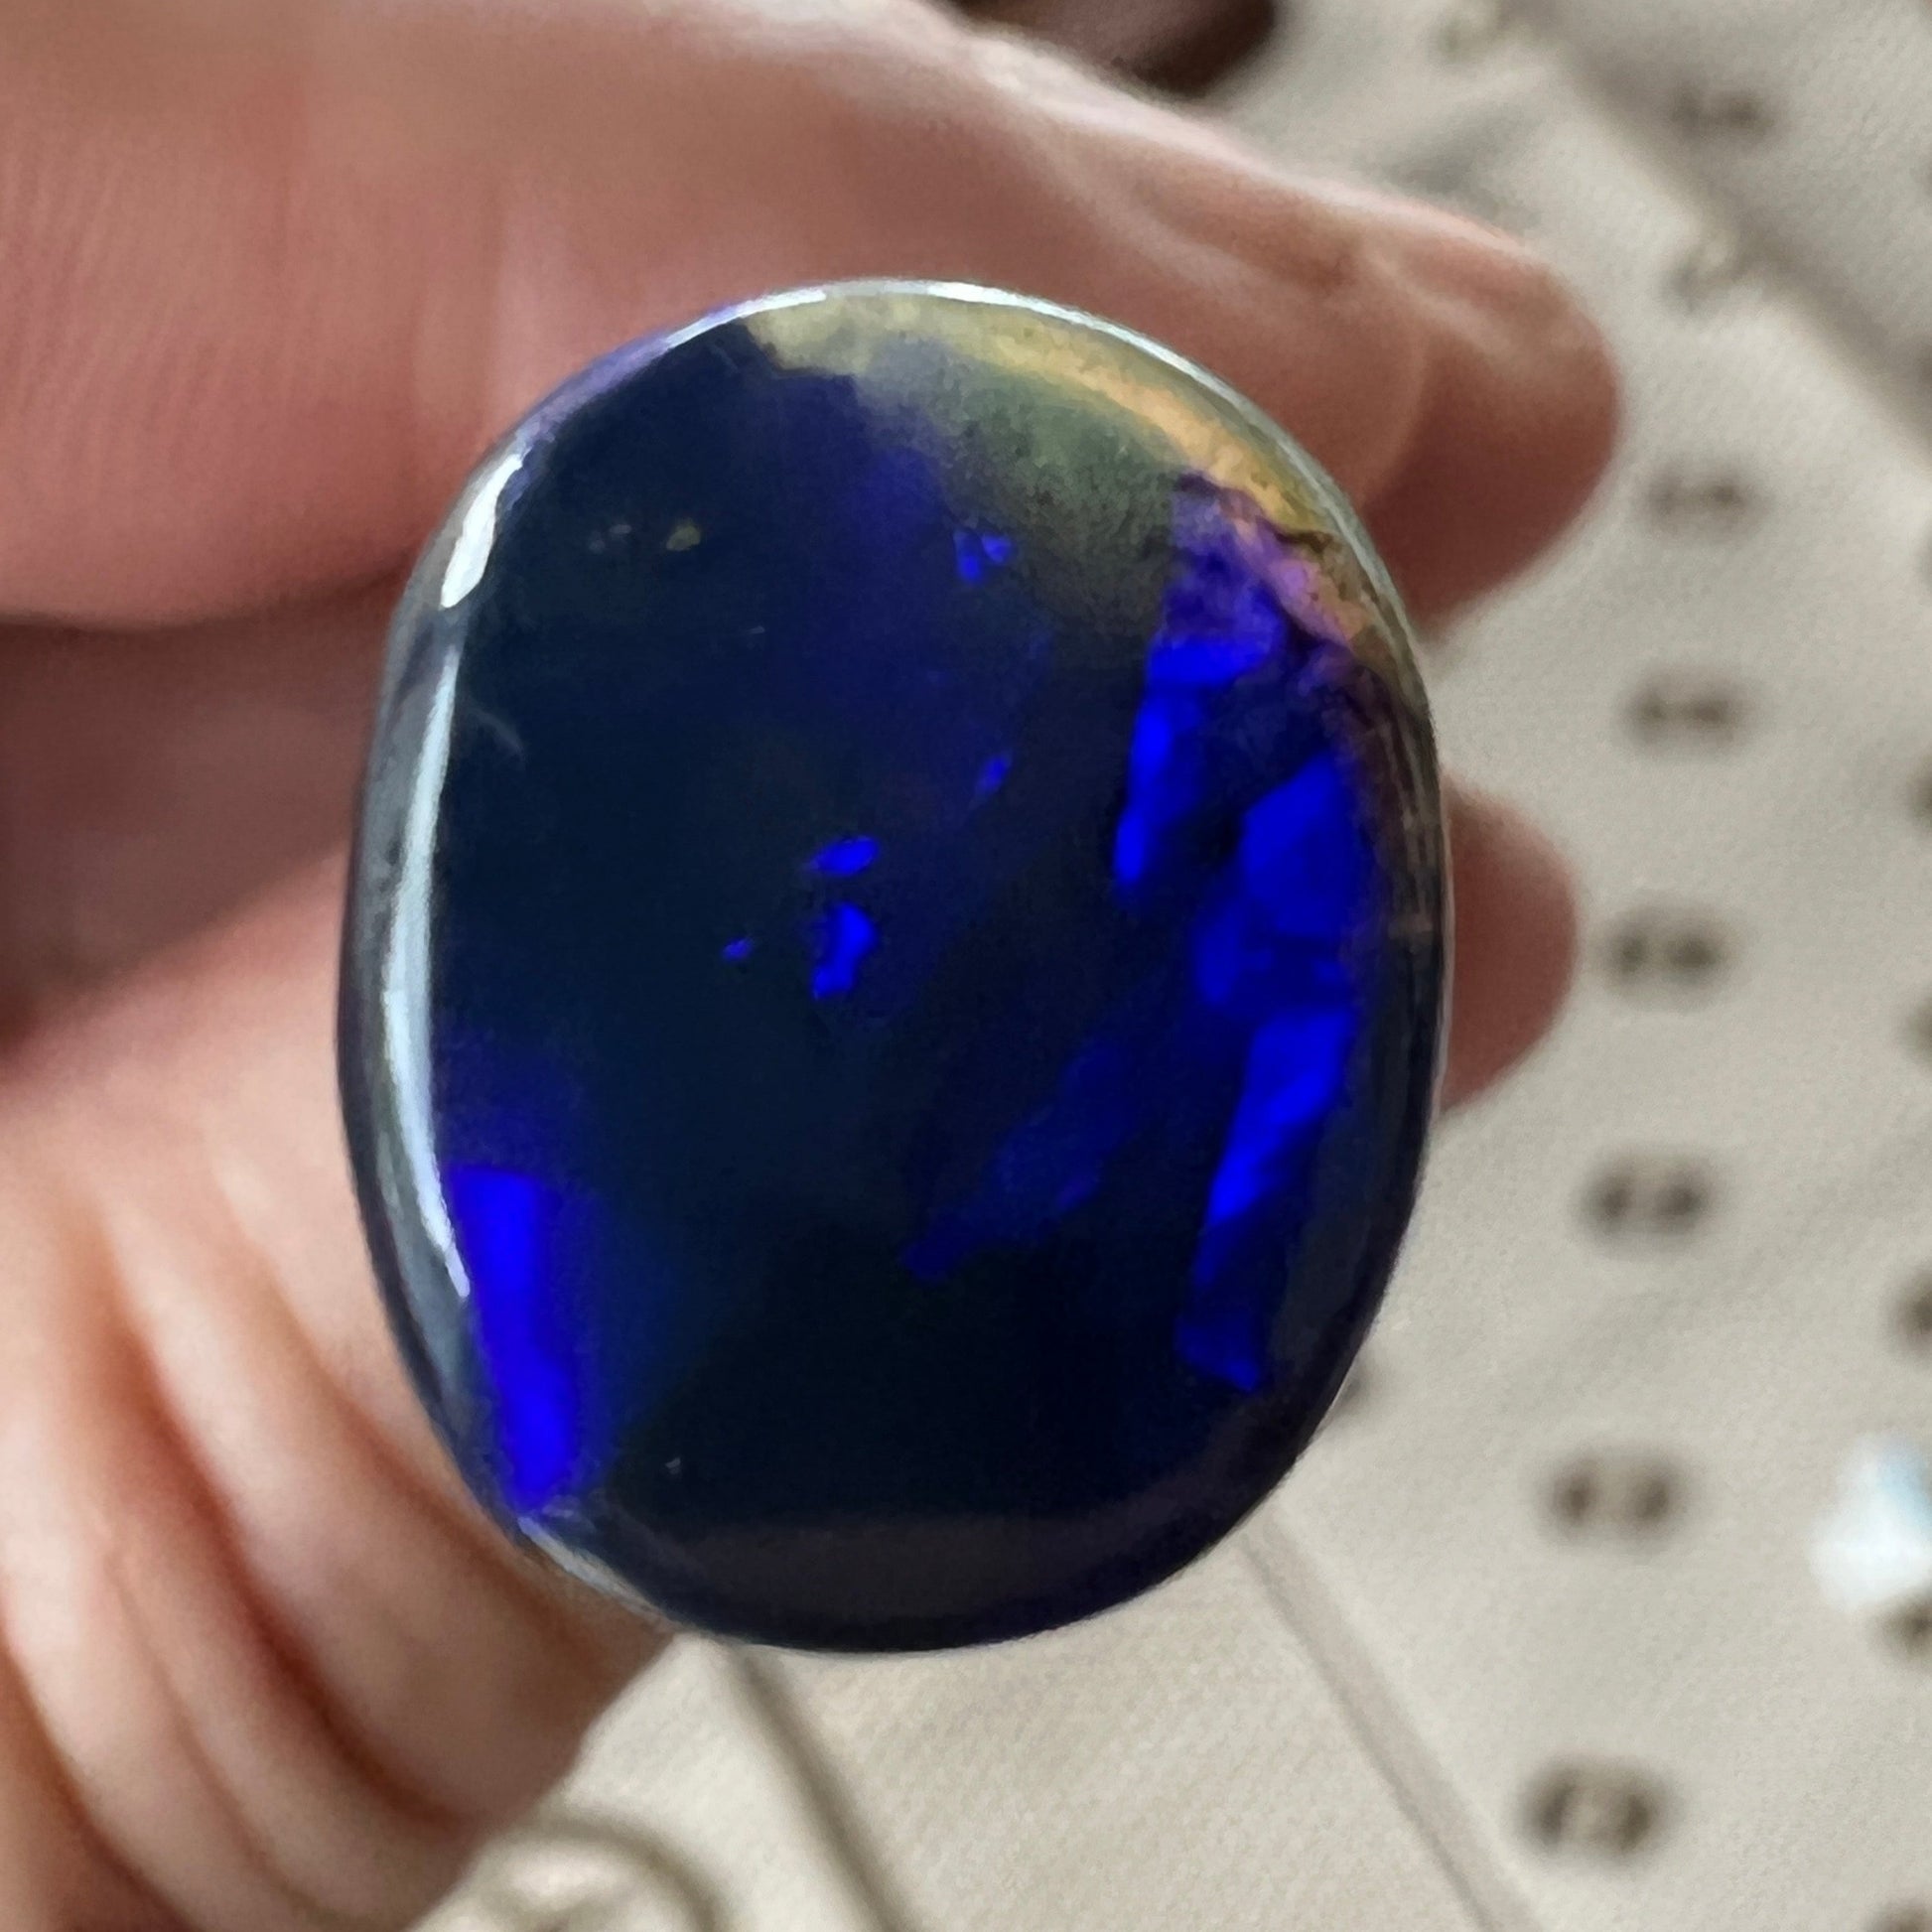 Nice Lightning Ridge Blue on Black Opal. Nice dome and polish. Clear on one end. Can be cut down or left as is, hence discounted price.